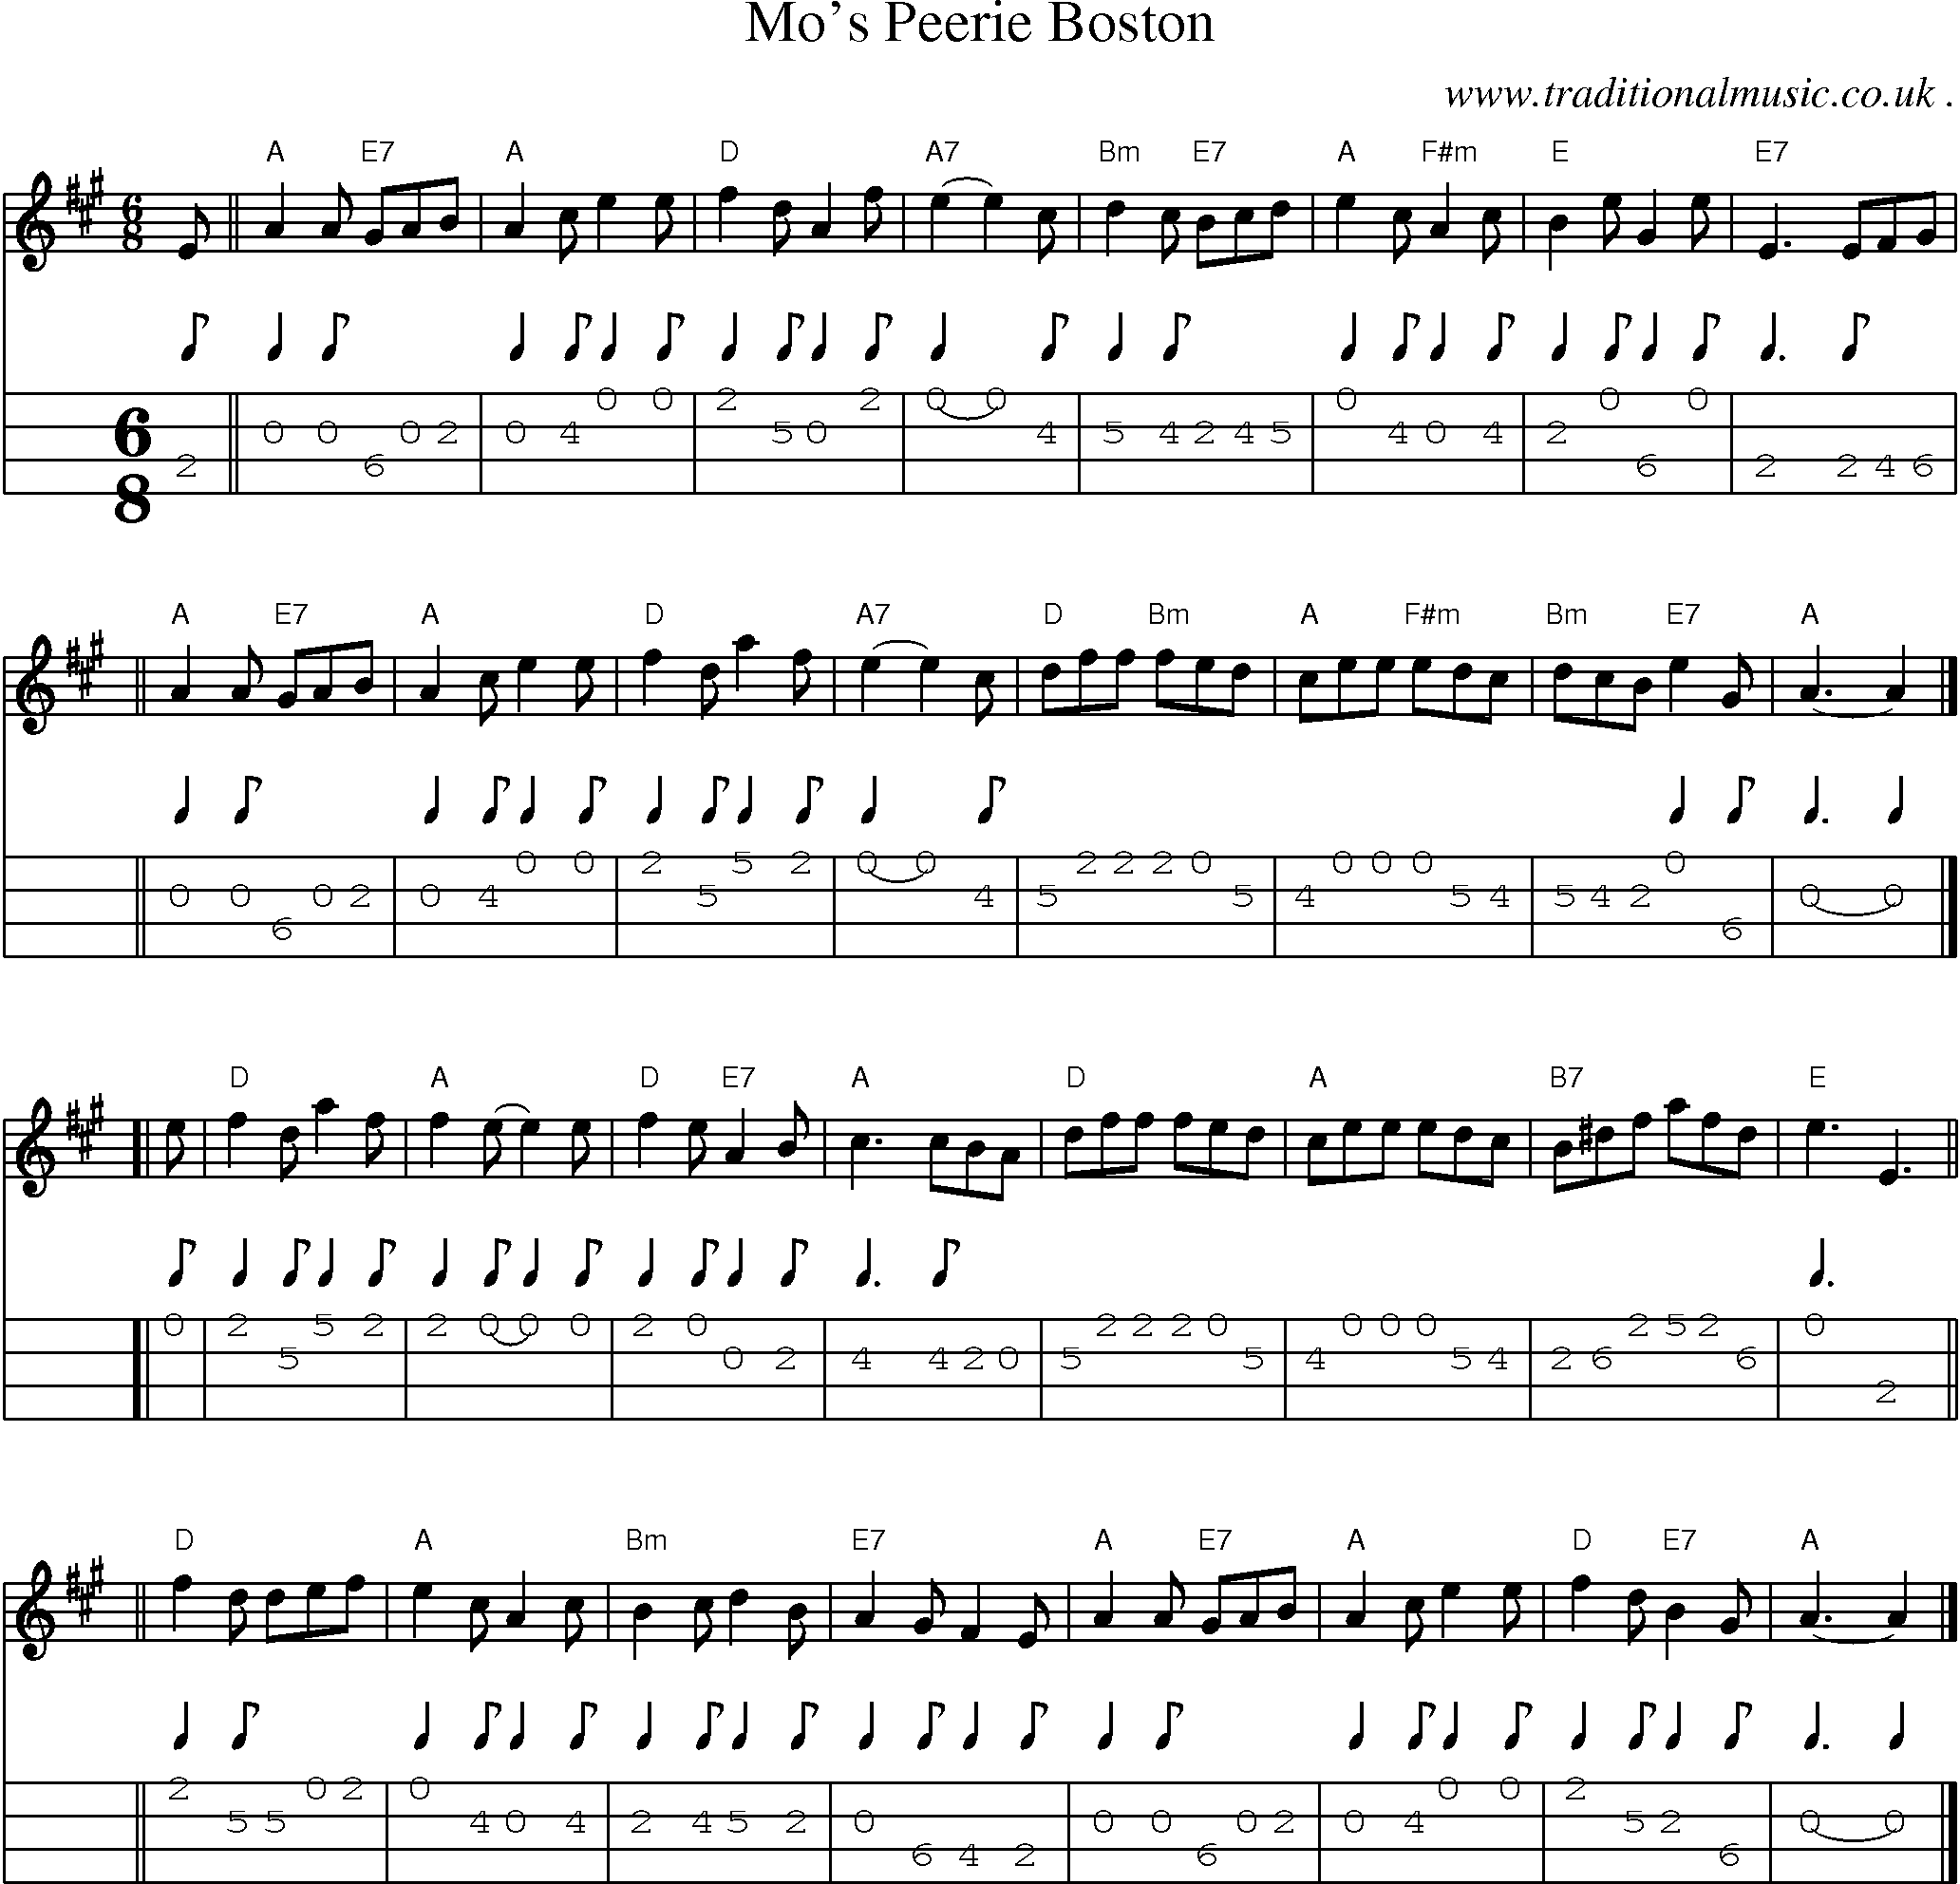 Sheet-music  score, Chords and Mandolin Tabs for Mos Peerie Boston